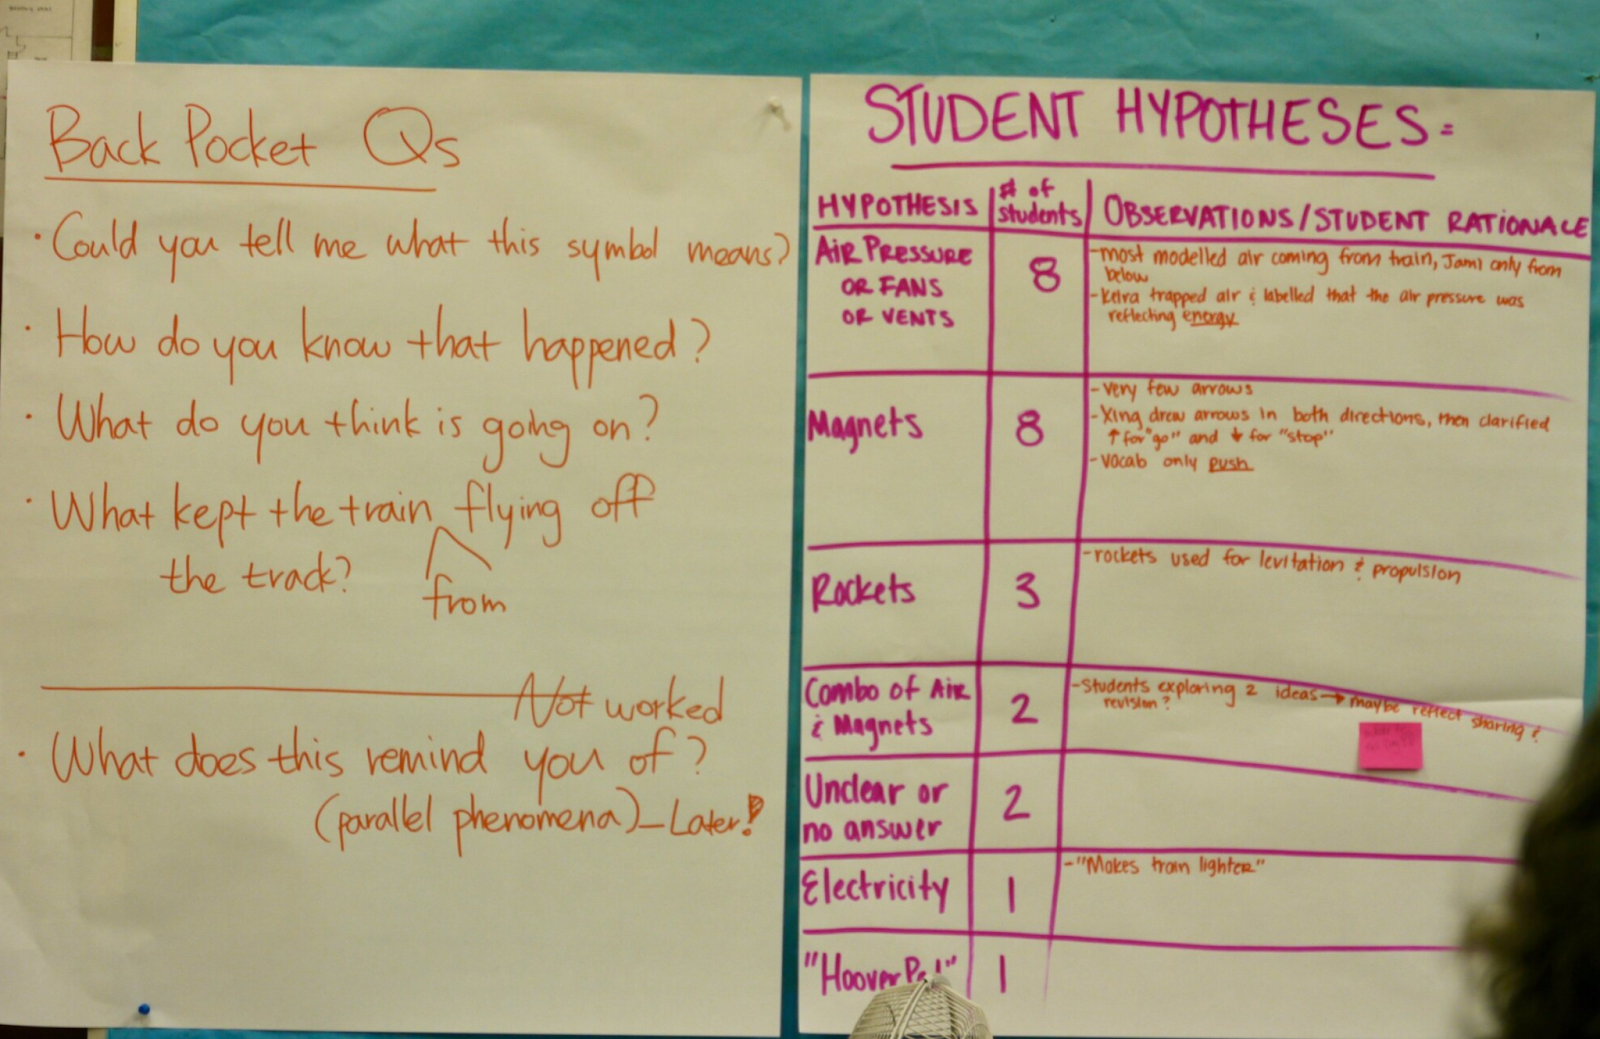 The left paper shows back pocket Qs such as "Could you tell me what this symbol means?" and "How do you know that happened?". the paper on the right shows student hypotheses, and a chart of the hypothesis, the number of students, and the observations/student rationale.